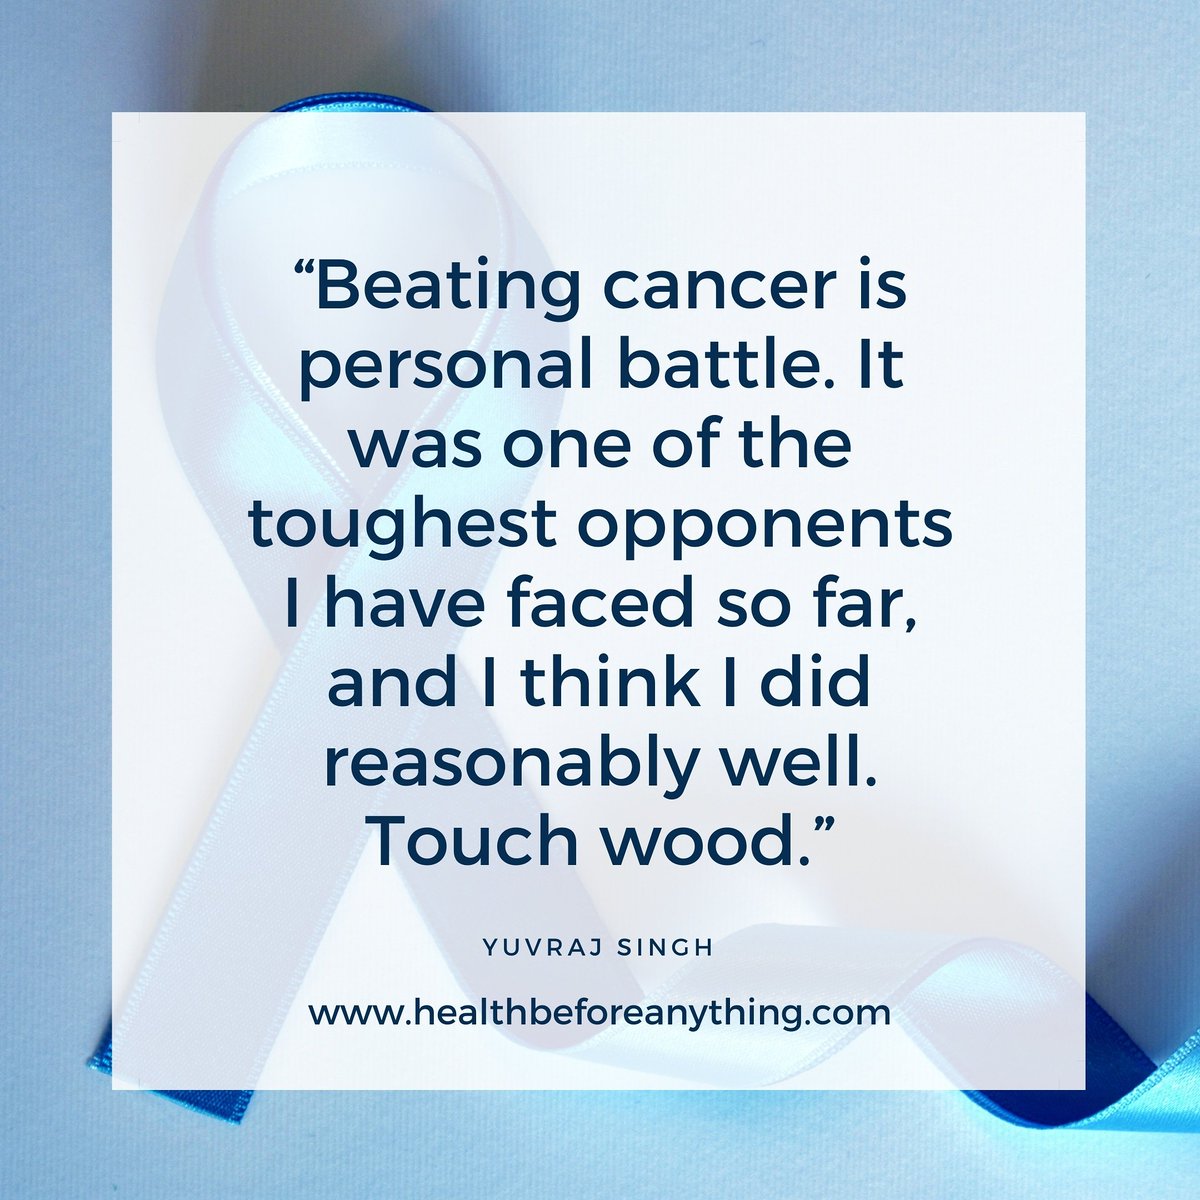 Spread the Lung Cancer Awareness by sharing this.
.
.
.
#LCAM #awareness #lungcancer #lungcancerawareness #lungcancerwarrior #quitsmoking #smokingkills #healthbeforeanything #cancerawareness #healthylifestyle #stayhealthy #healthawareness #livetobaccofree